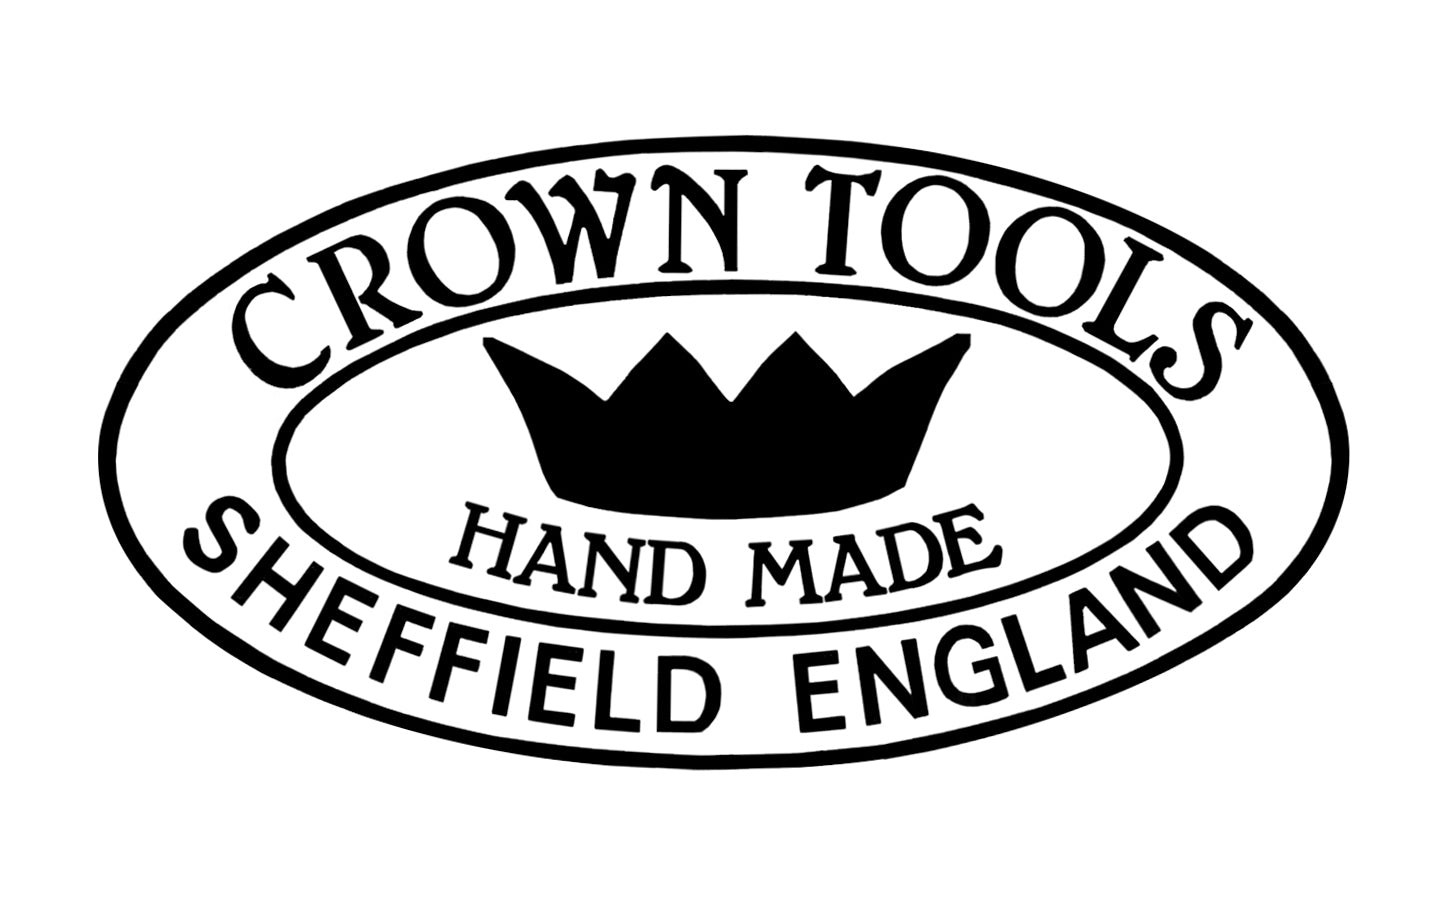 Crown Tools 3" (76 mm) Filing Knife with a flexible spring-tempered blade. High quality putty knife for filing holes, cracks, etc. Walnut wood handle. Made in Sheffield, England. Model 314.